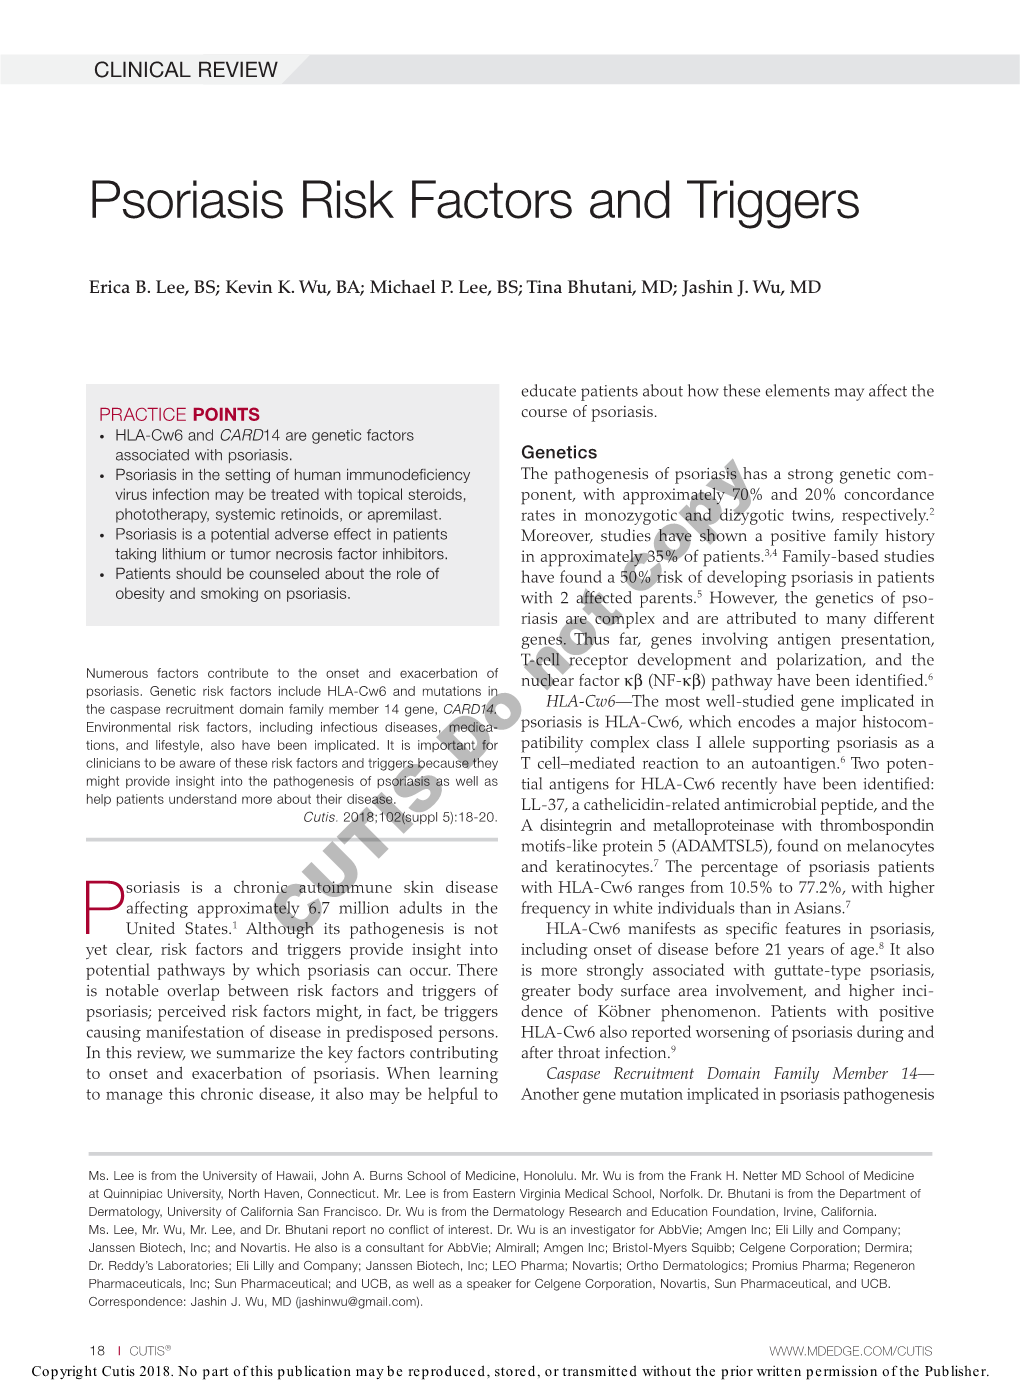 Psoriasis Risk Factors and Triggers